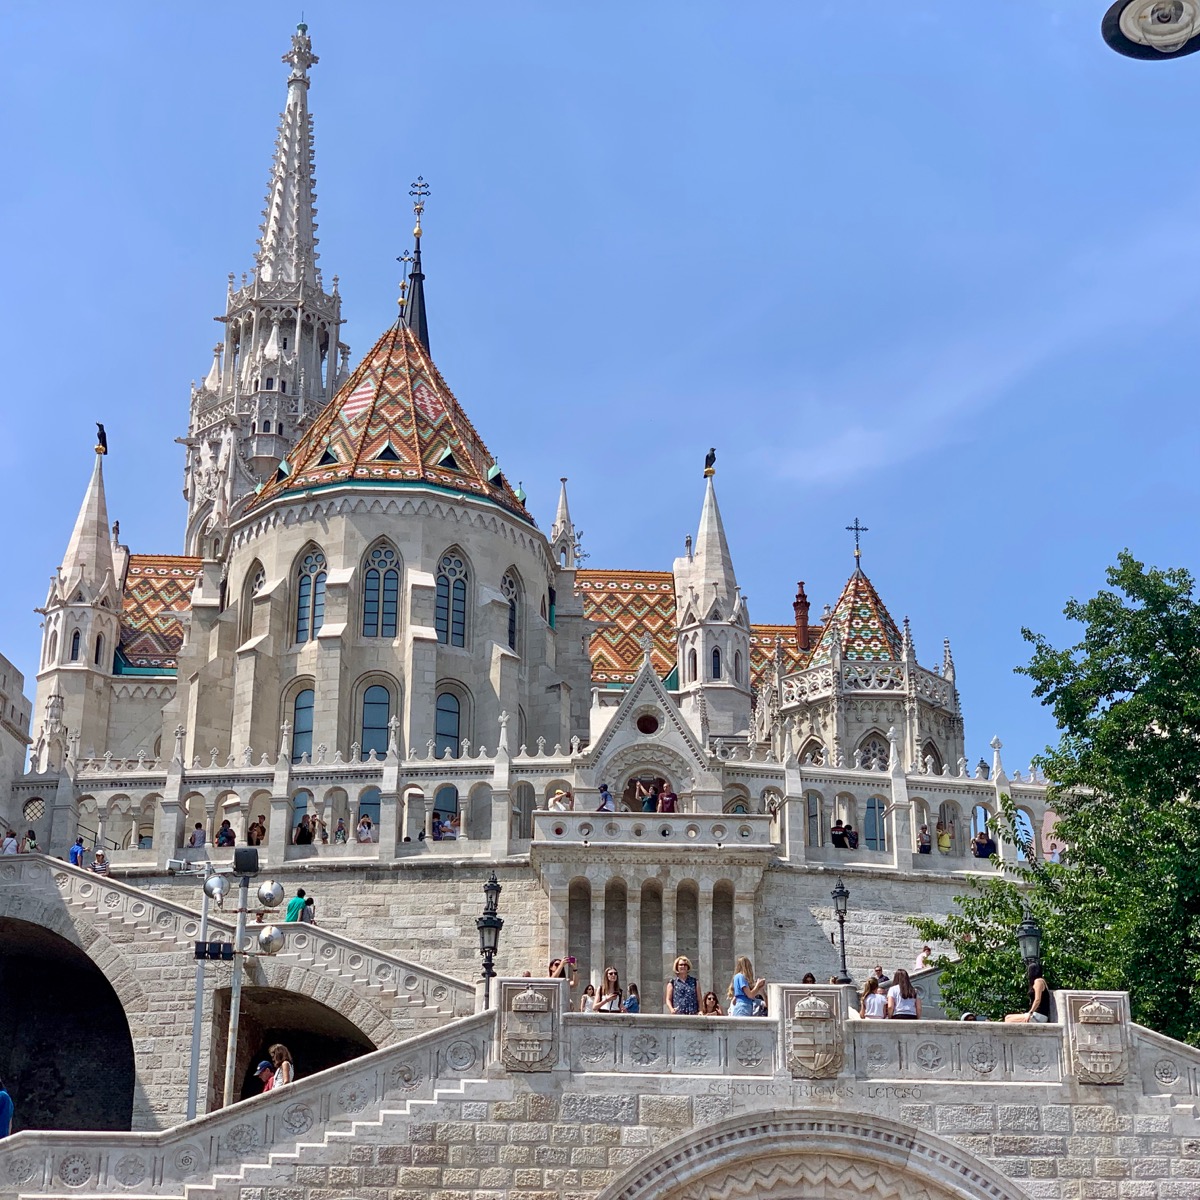 Another view of Matthias Church